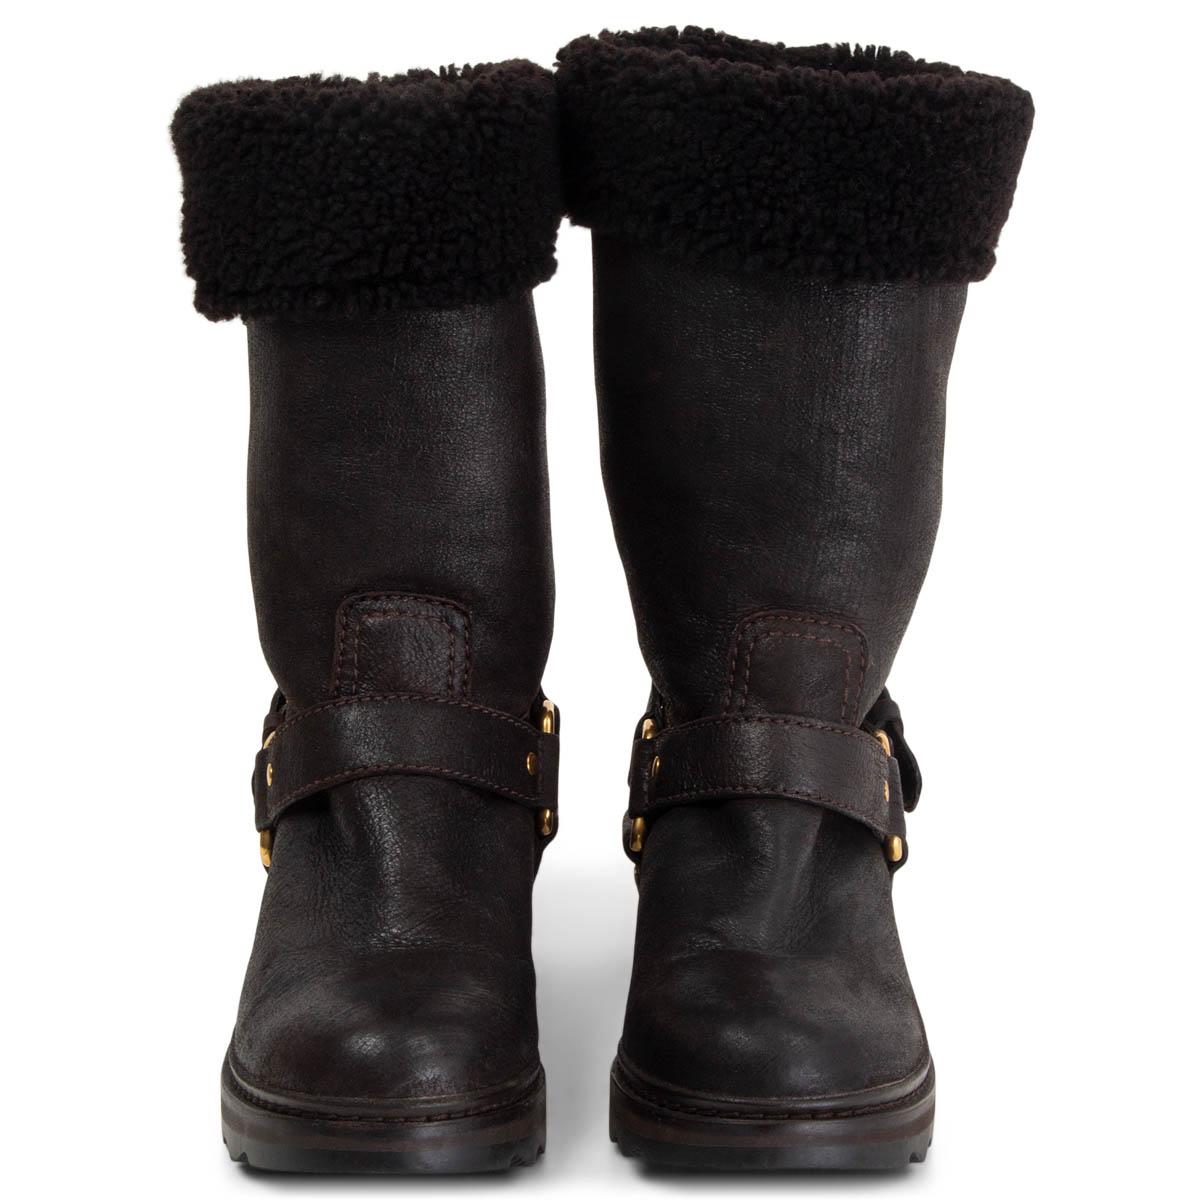 100% authentic Prada Linen Rossa shearling lined biker boots in espresso brown soft calfskin featuring removable strap with gold-tone metal buckles. Boots have a brown stacked heel and rubber sole. Have been worn and are in excellent condition.